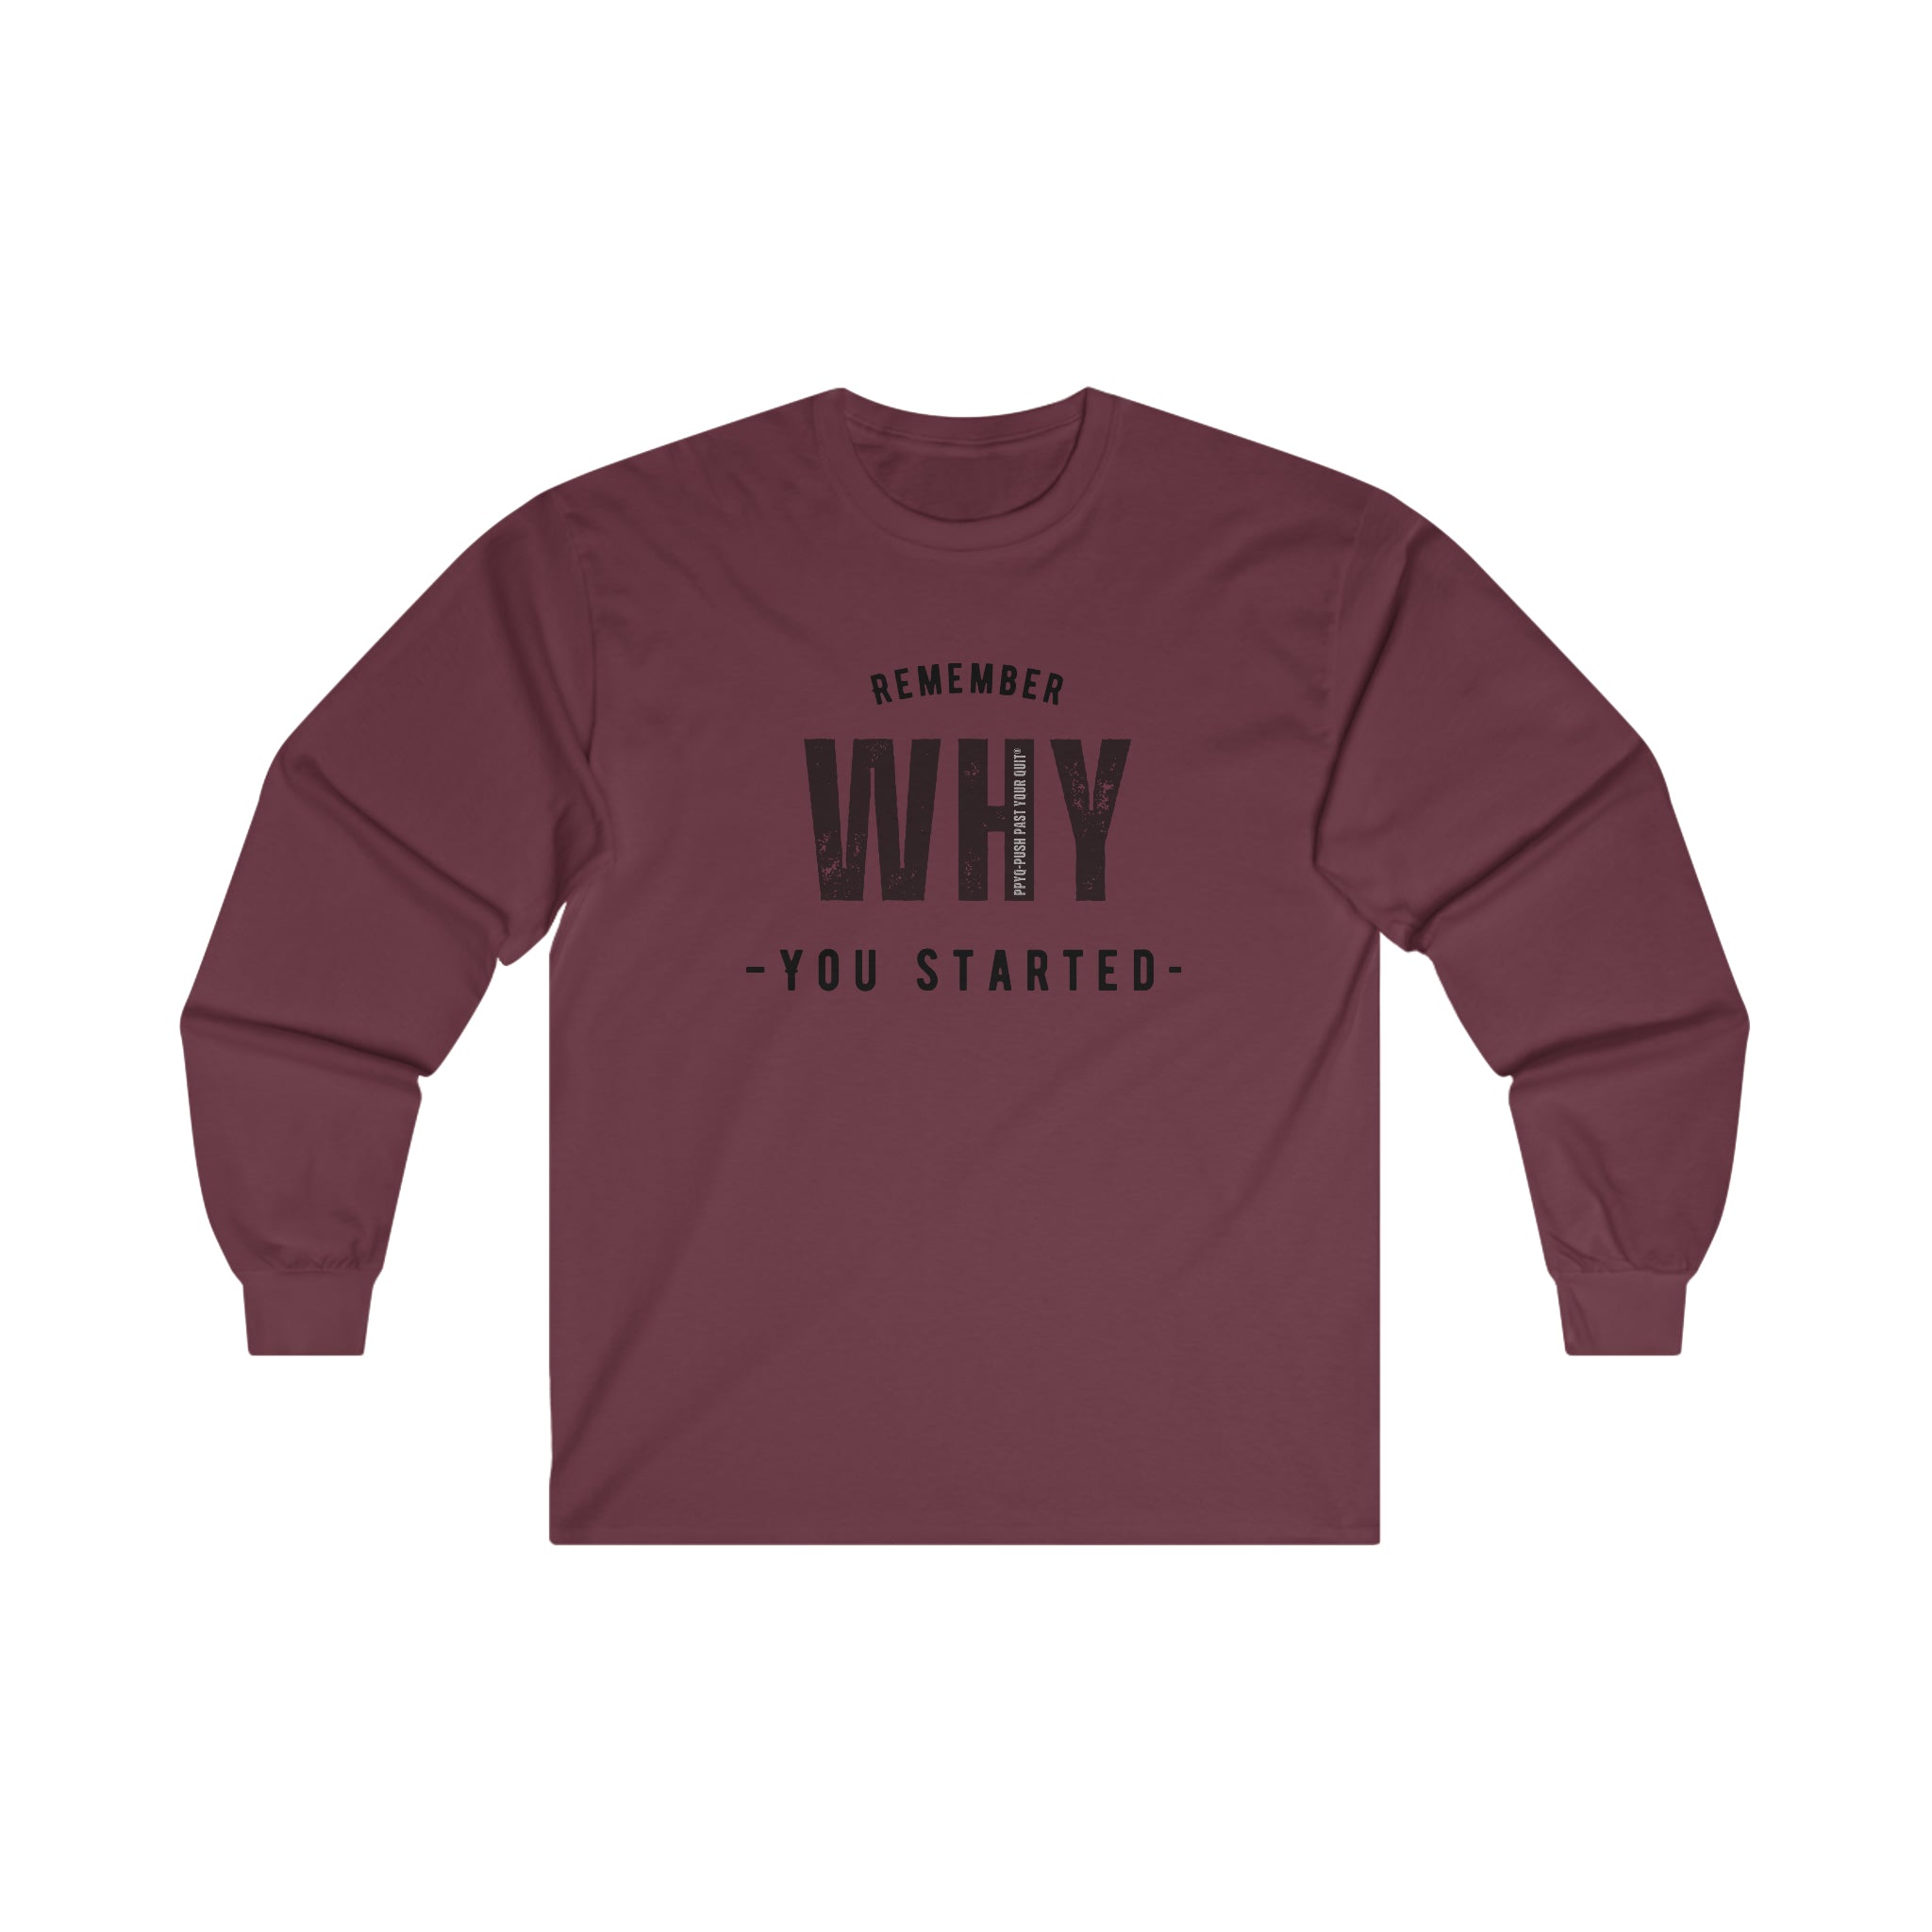 Remember Why You Started (Black)